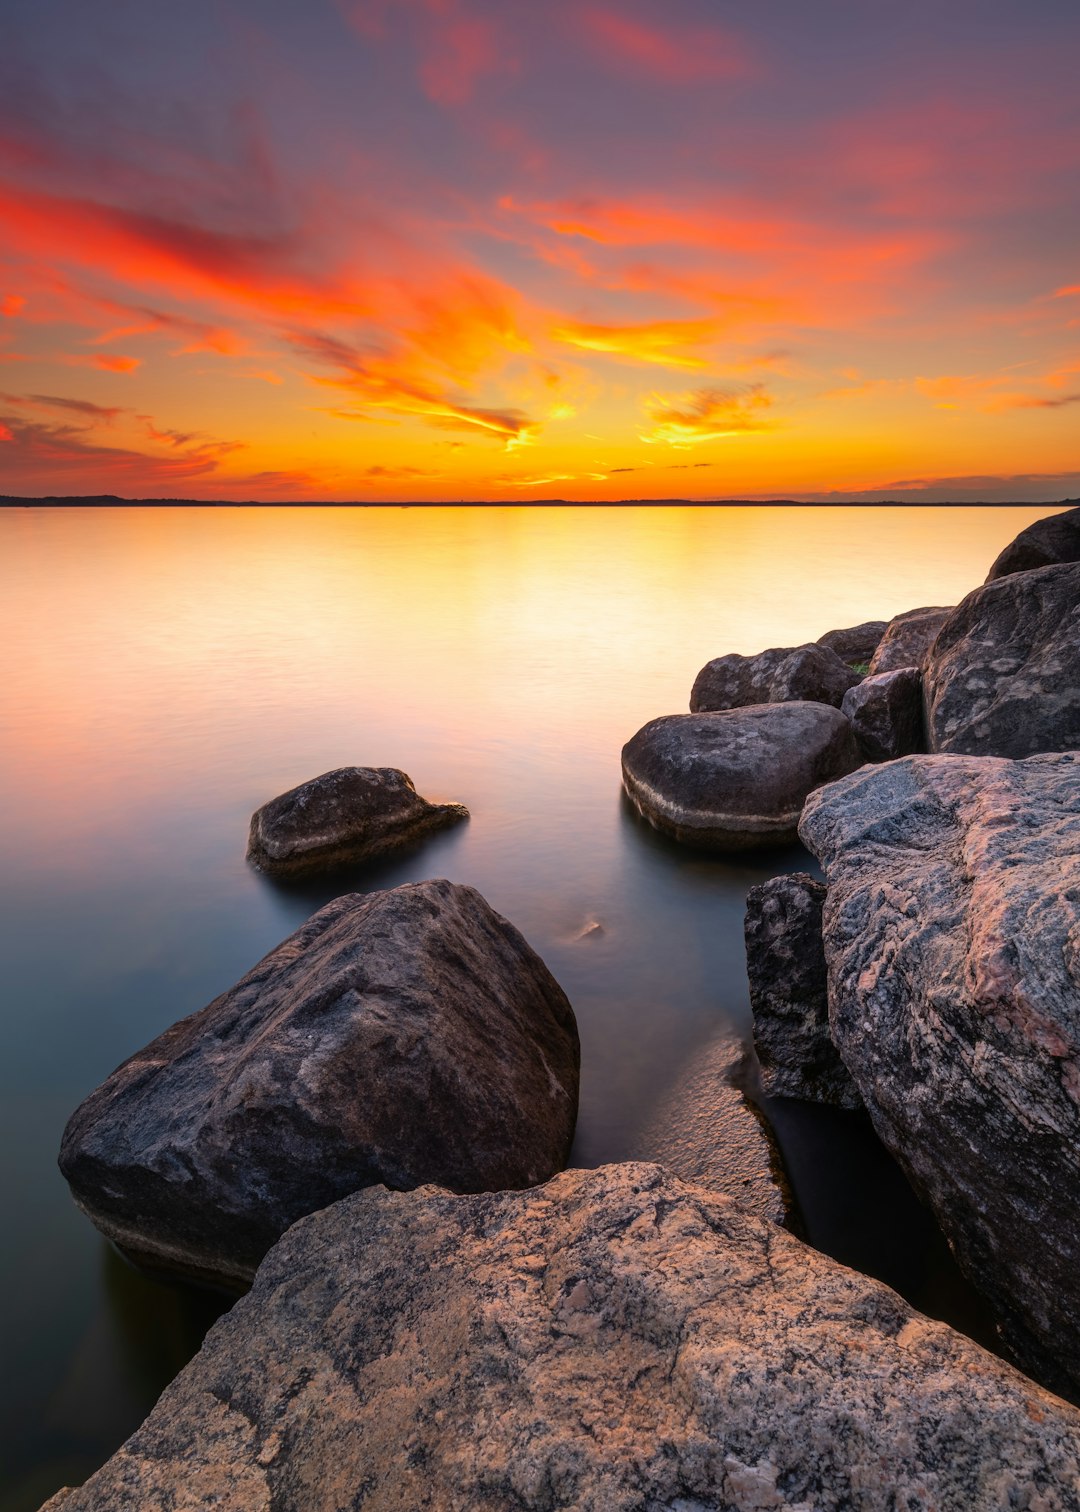 gray rocks on body of water during sunset